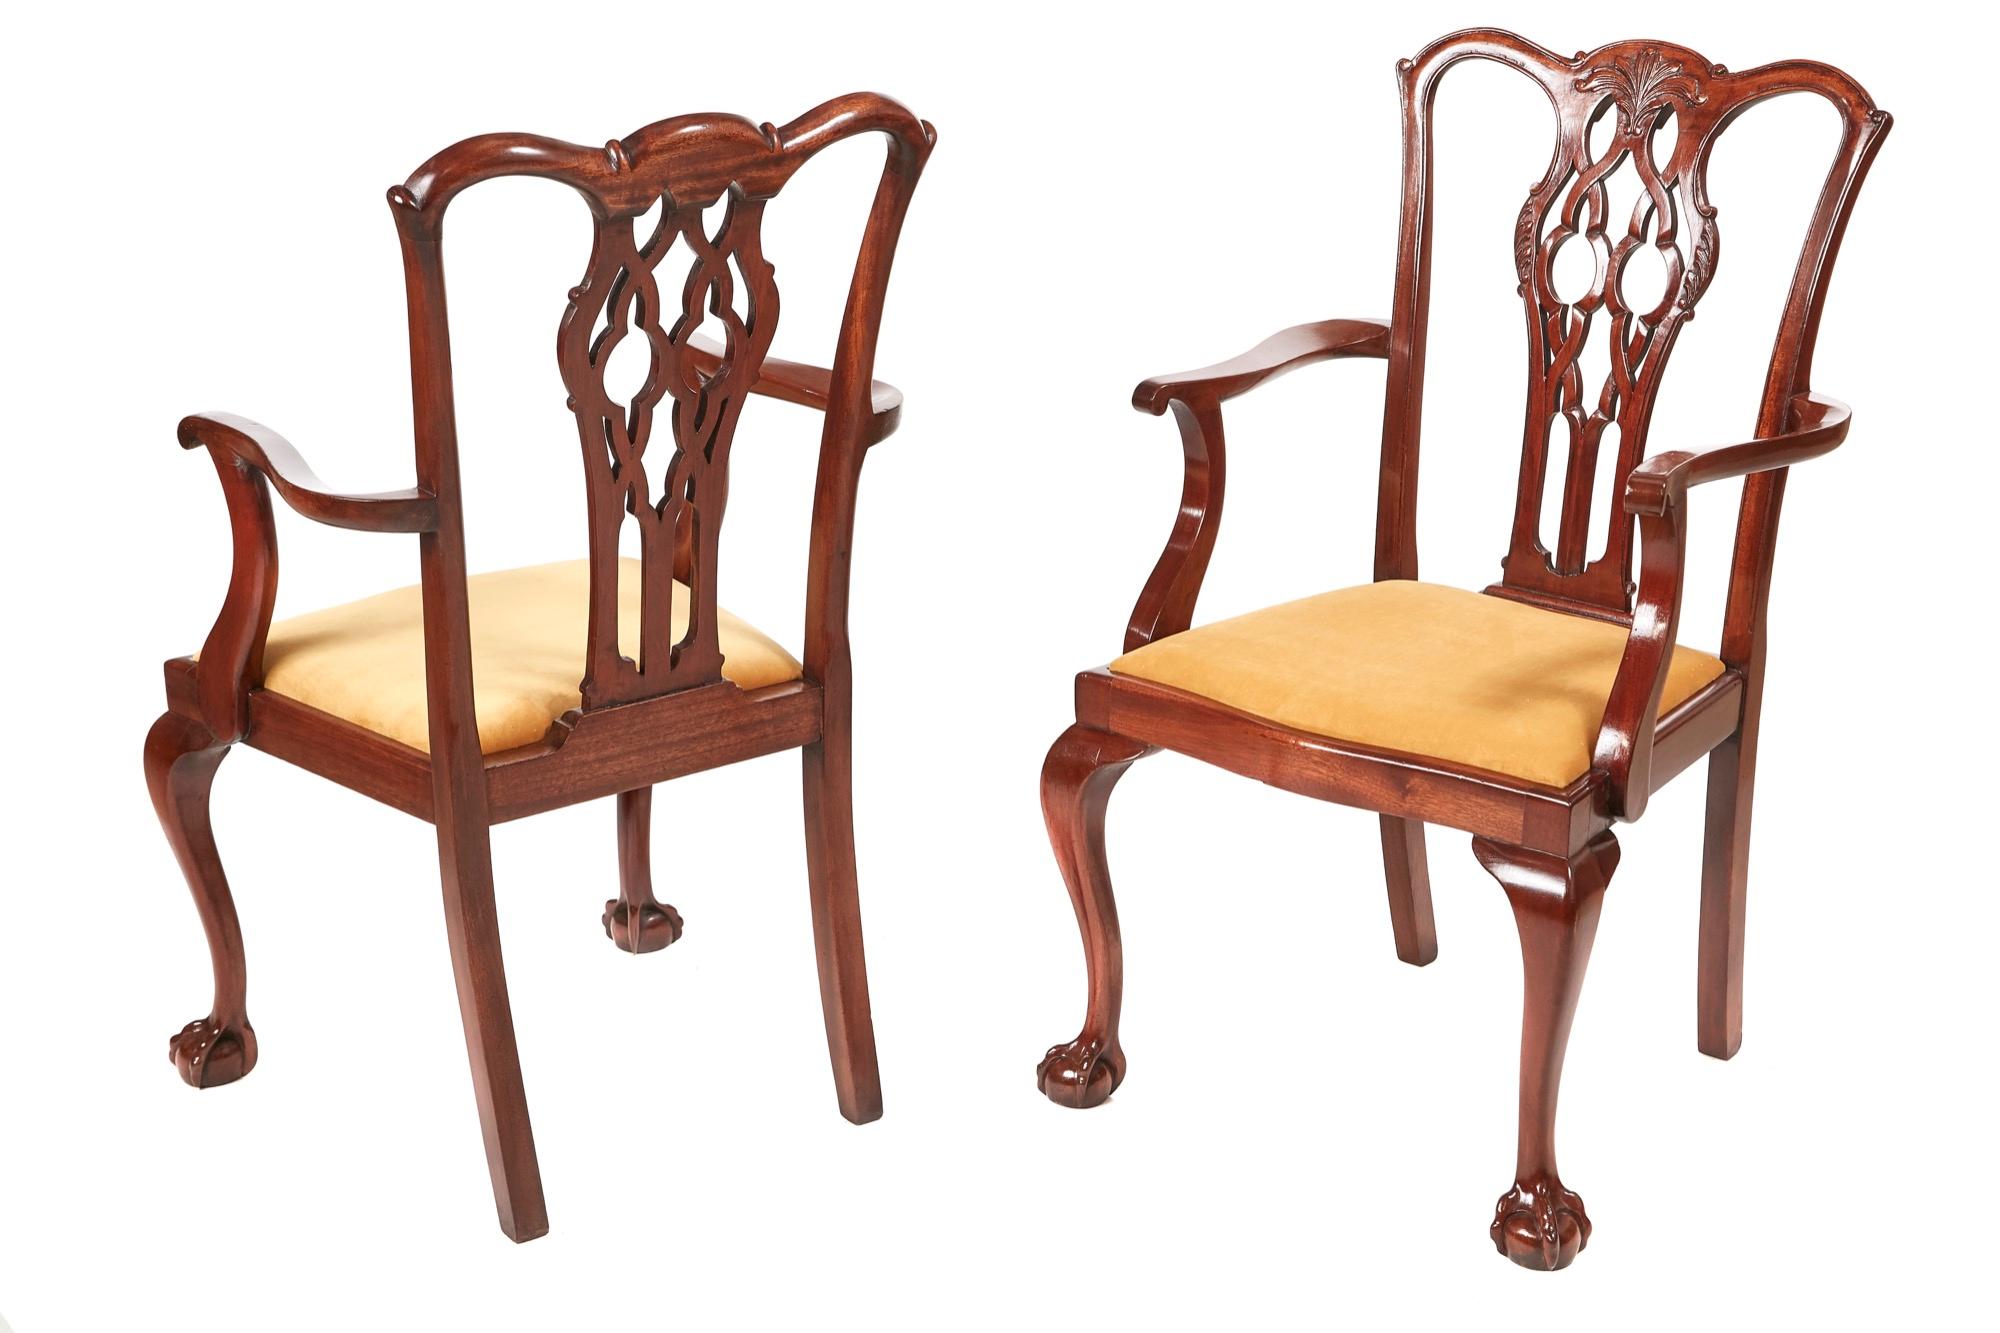 Quality set of 6 mahogany chippendale style dining chairs, having lovely carved shaped tops, with shaped pierced backs, newly recovered drop in seats, lovely shaped arms to the carver chairs, standing on claw and ball legs to the front outswept back